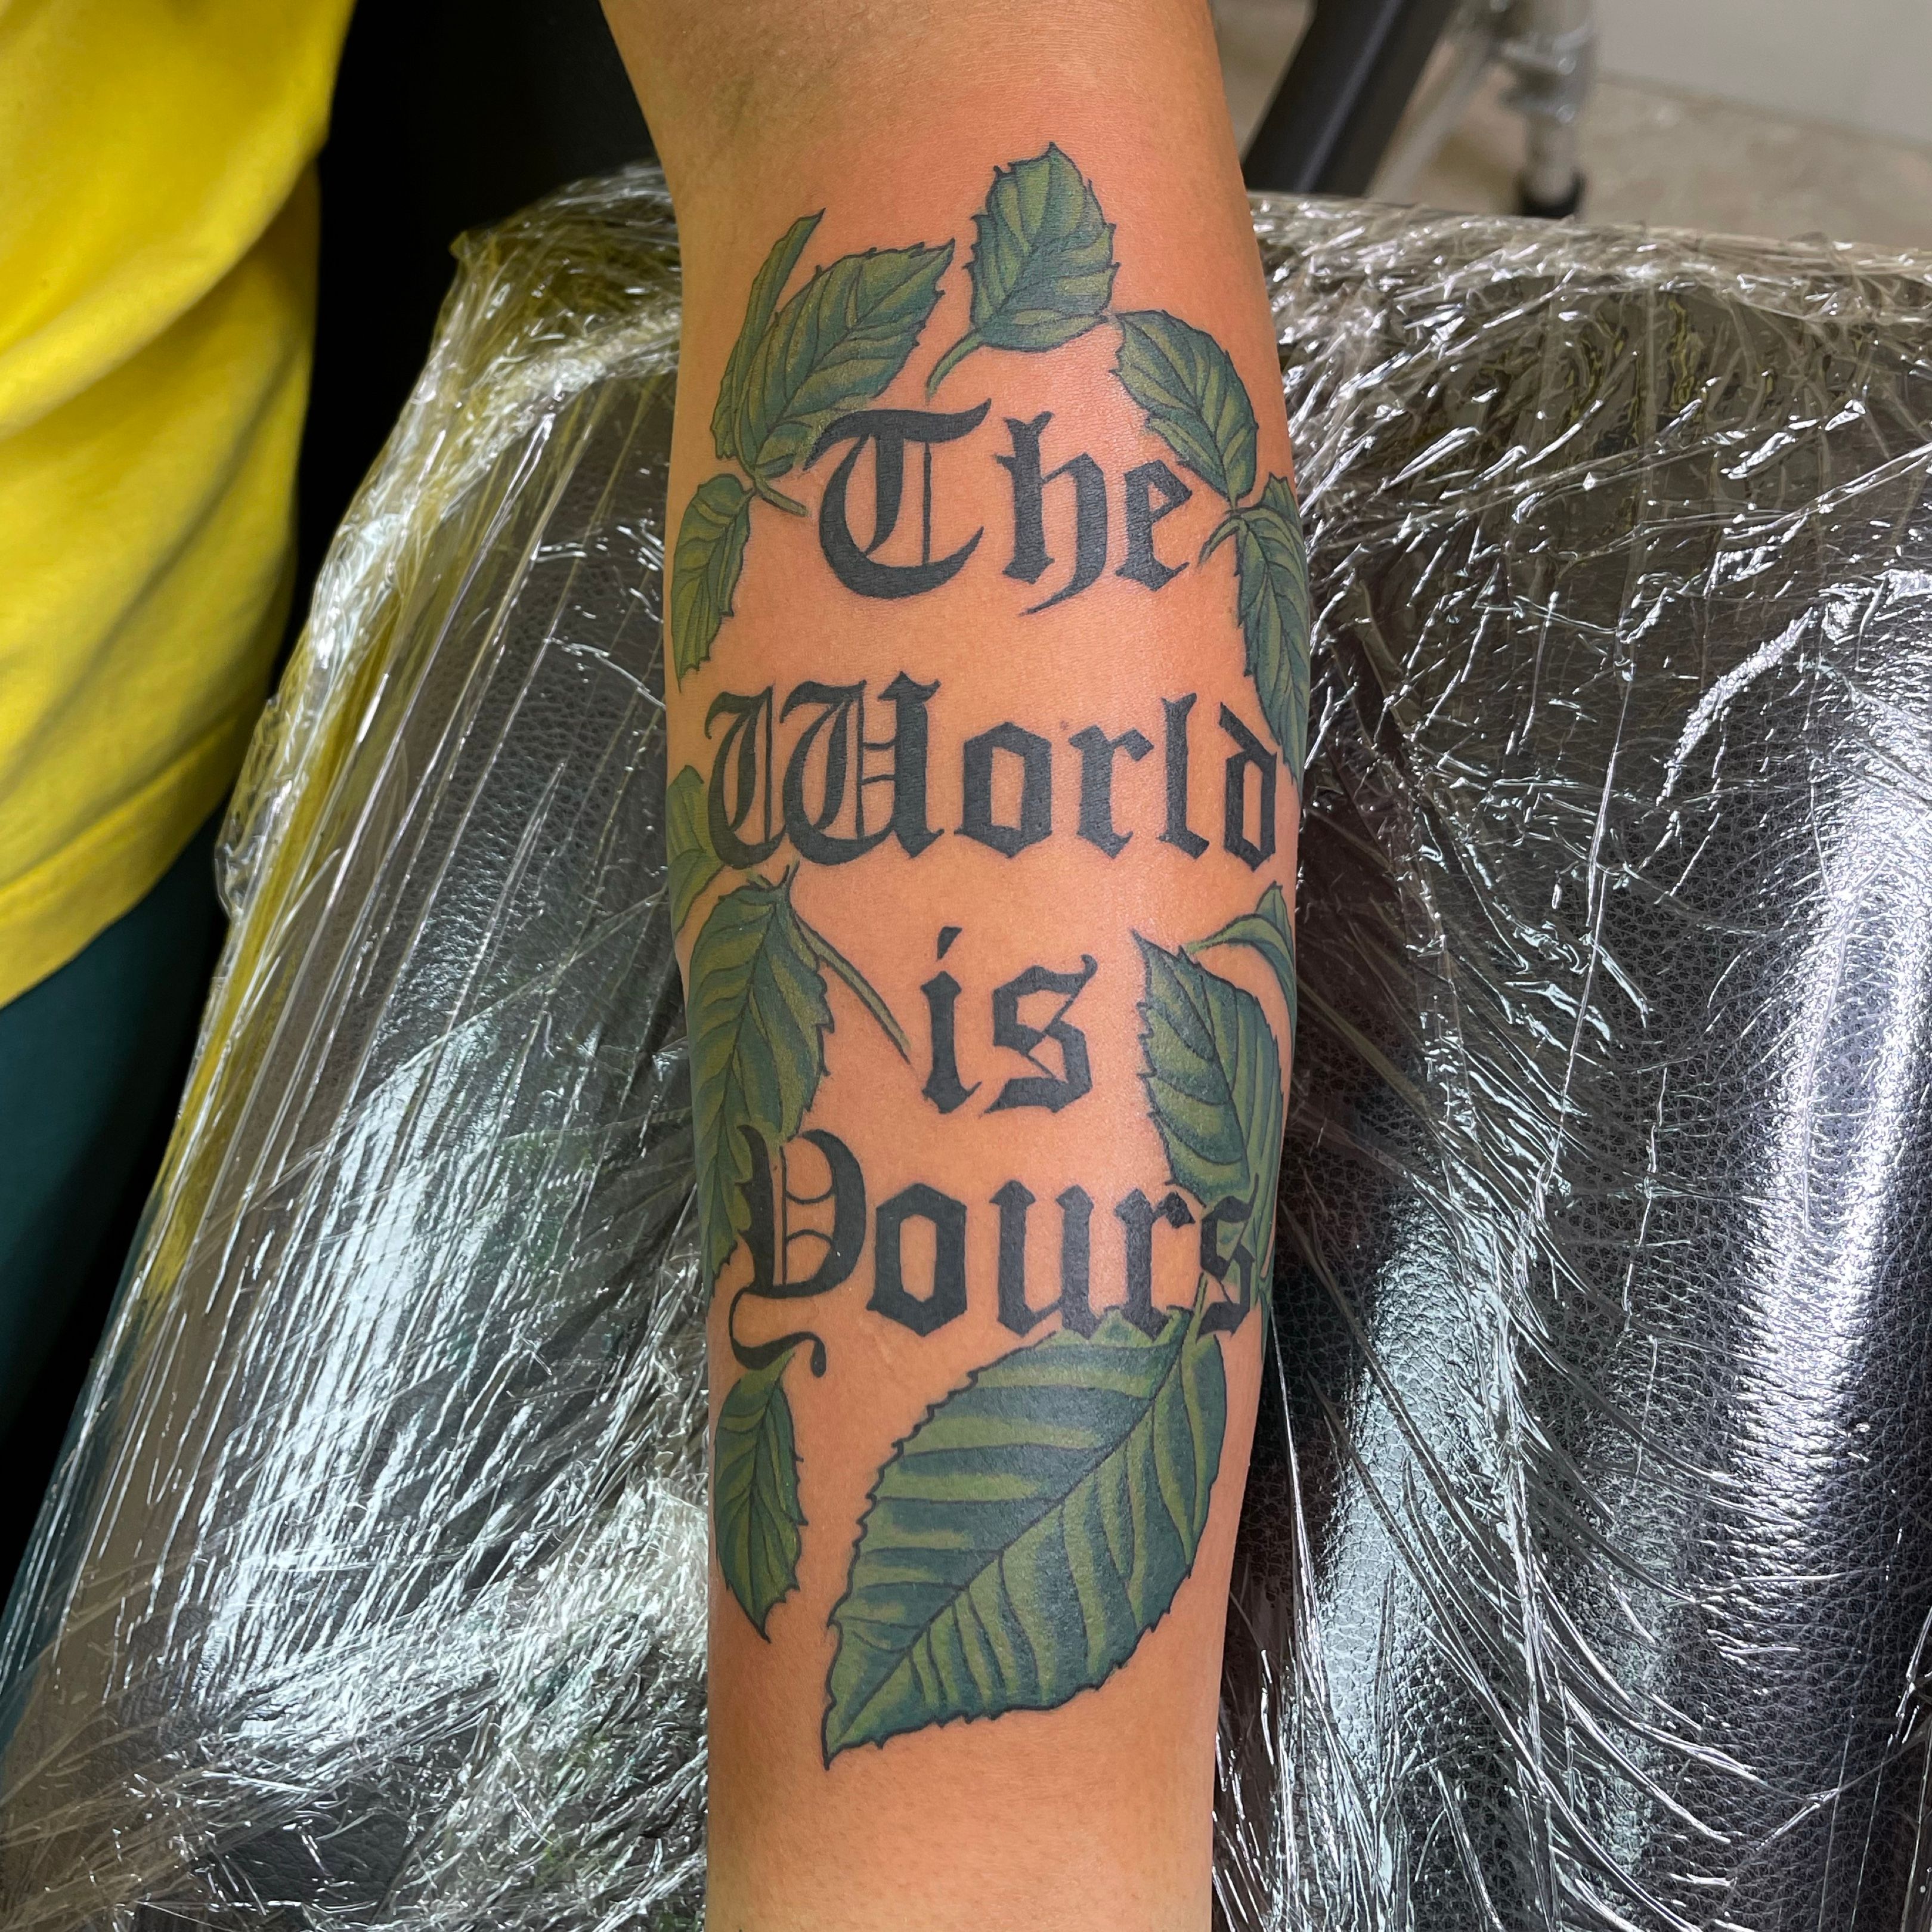 The World Is Yours tattoo